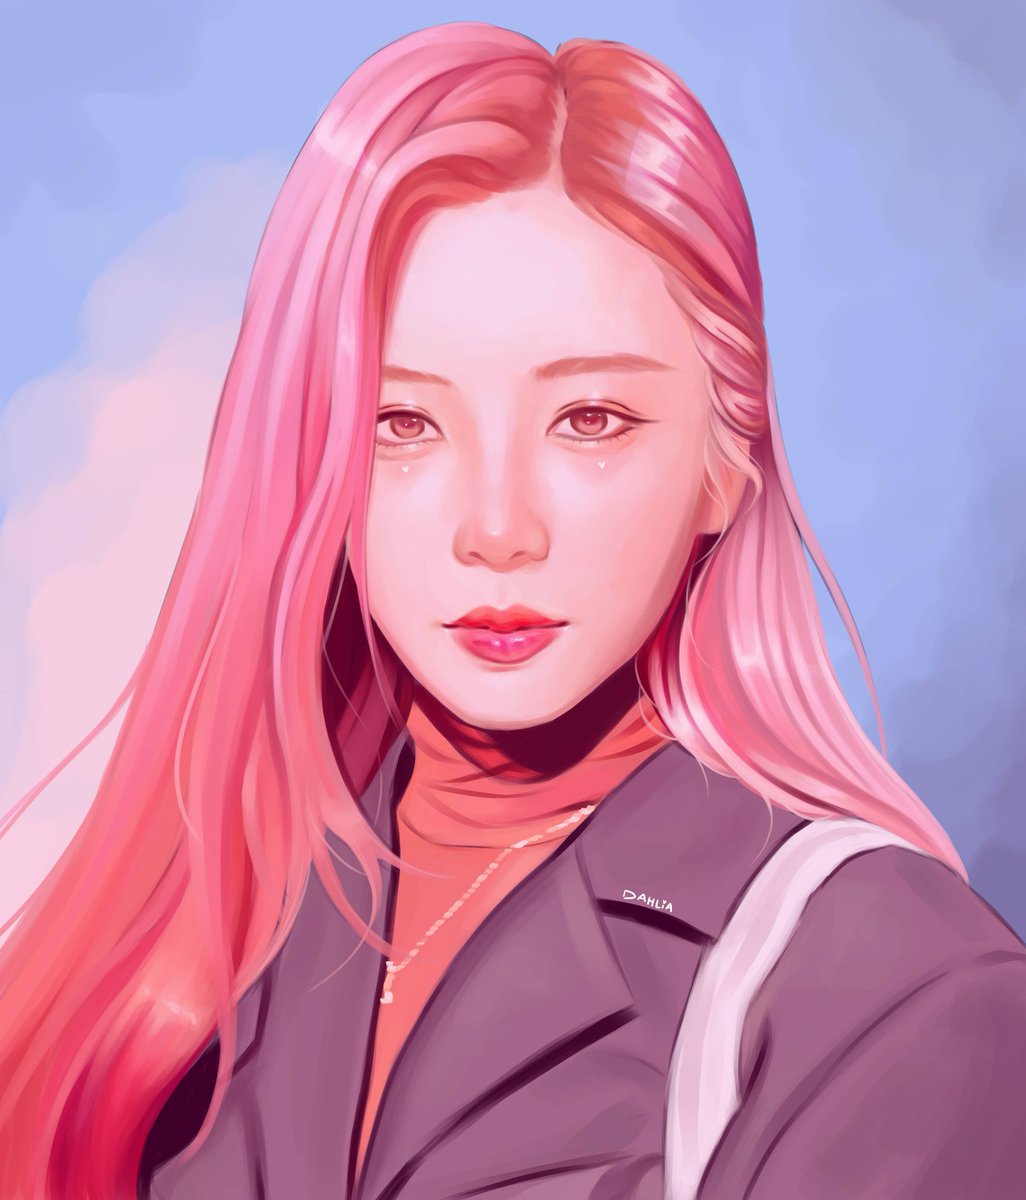 Hello, yes I am already back with a new drawing👀 I couldn't resist drawing this Minji💕

#JiU #JiUfanart #Dreamcatcher #Dreamcatcherfanart @hf_dreamcatcher